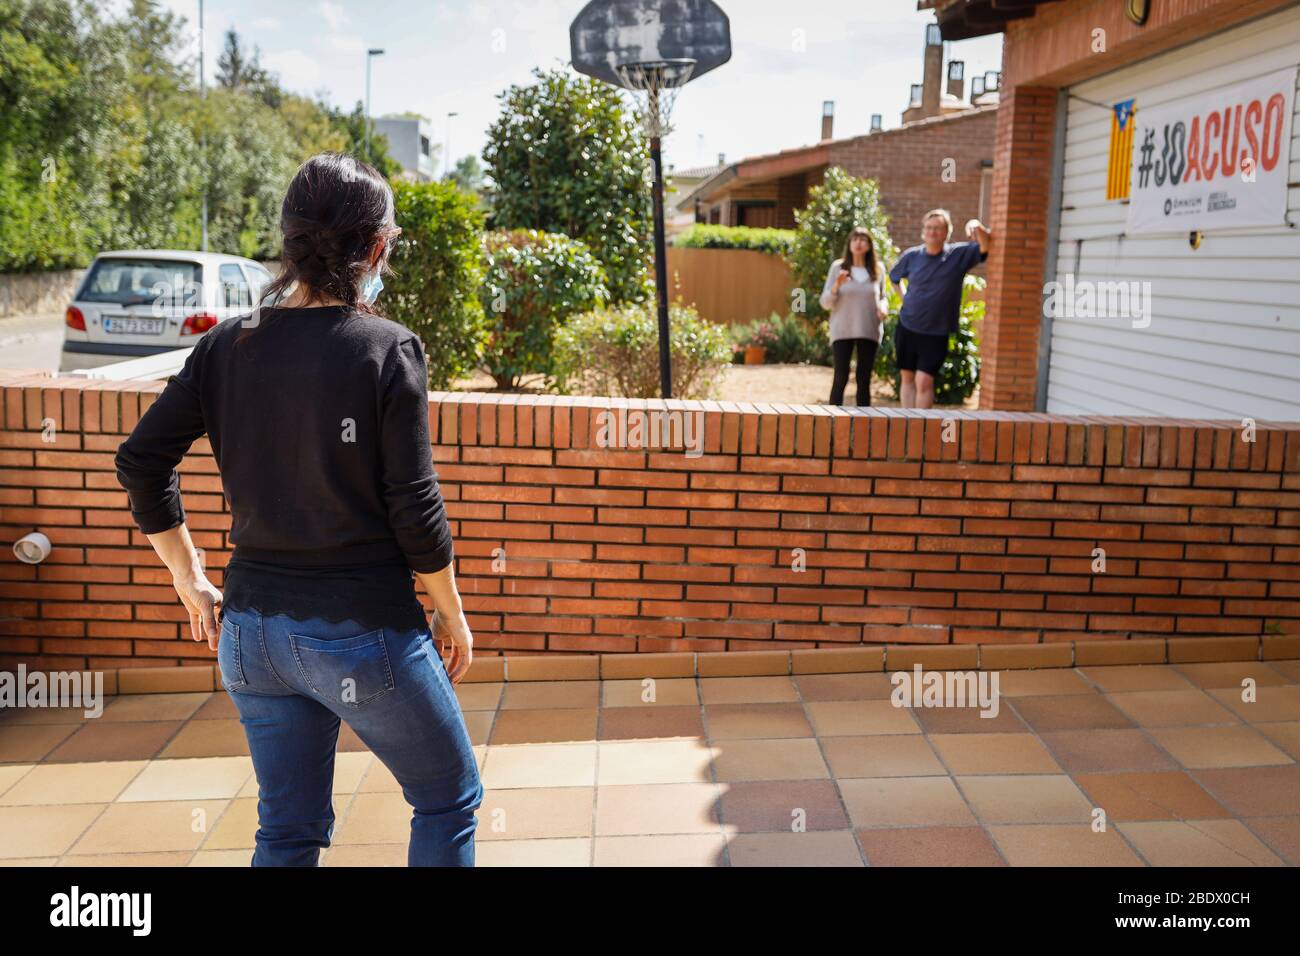 Woman talking to neighbours from a distance during Covid19 lockdown in Catalonia, Spain Stock Photo